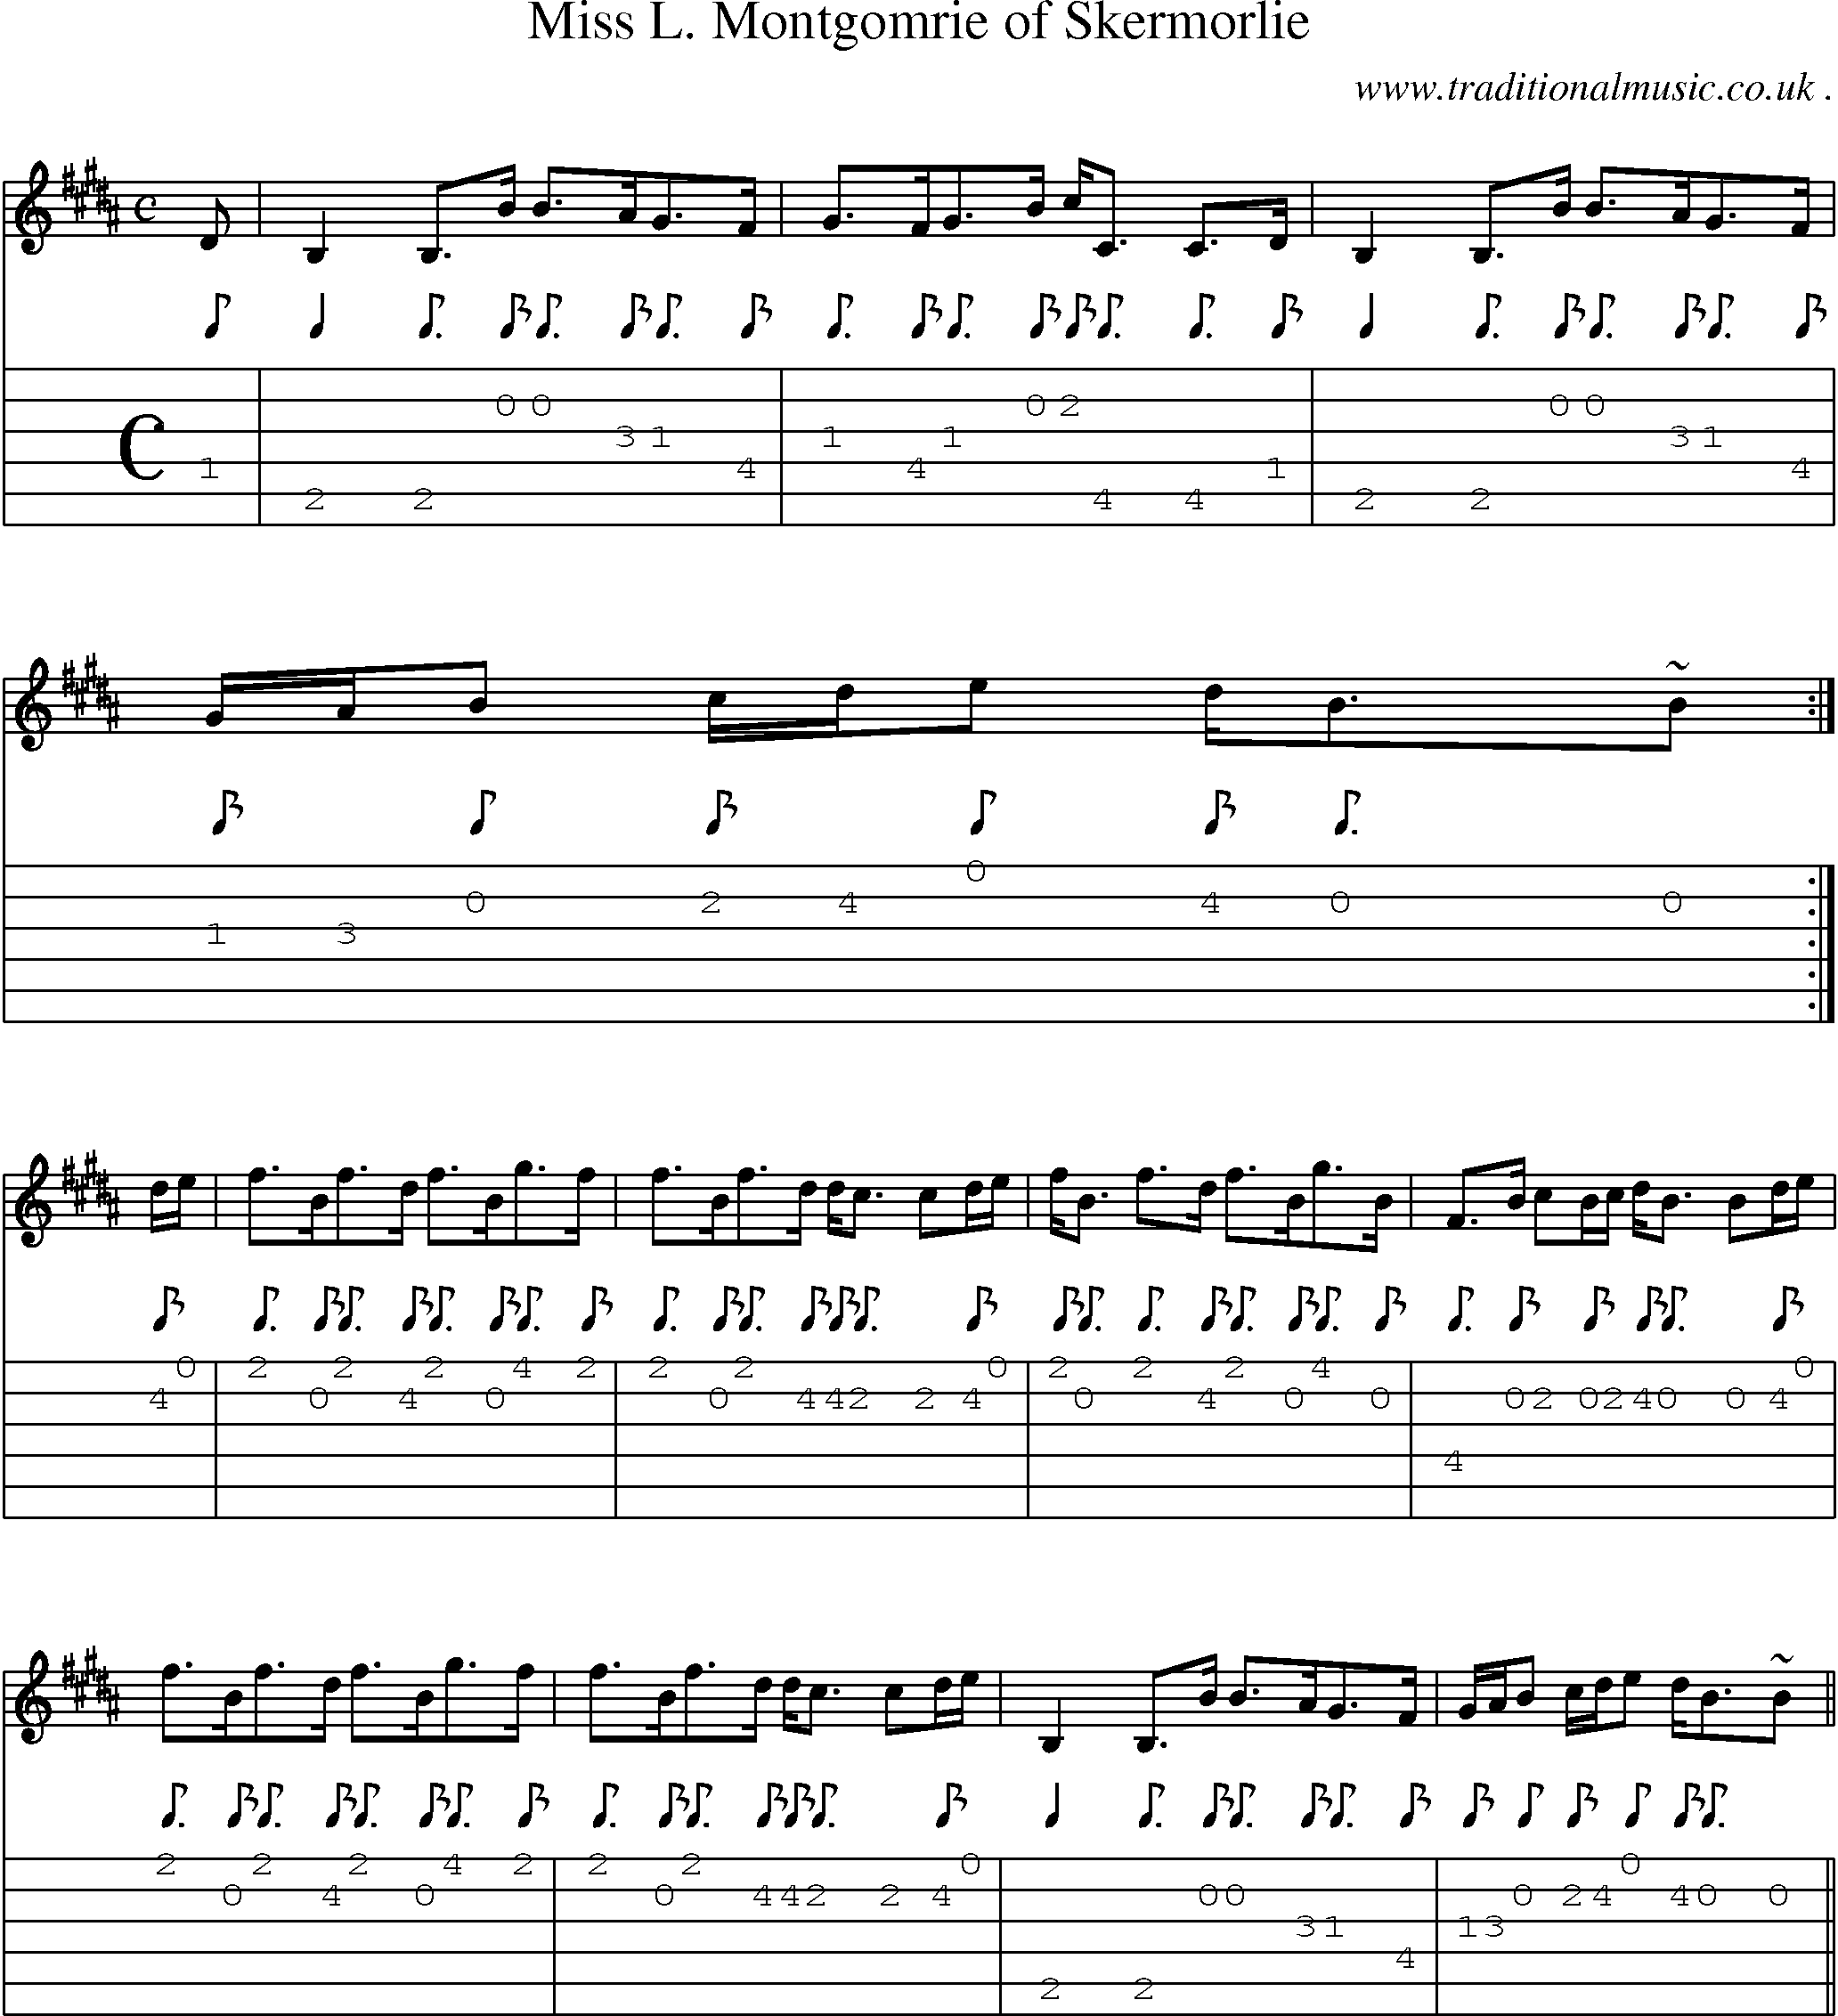 Sheet-music  score, Chords and Guitar Tabs for Miss L Montgomrie Of Skermorlie